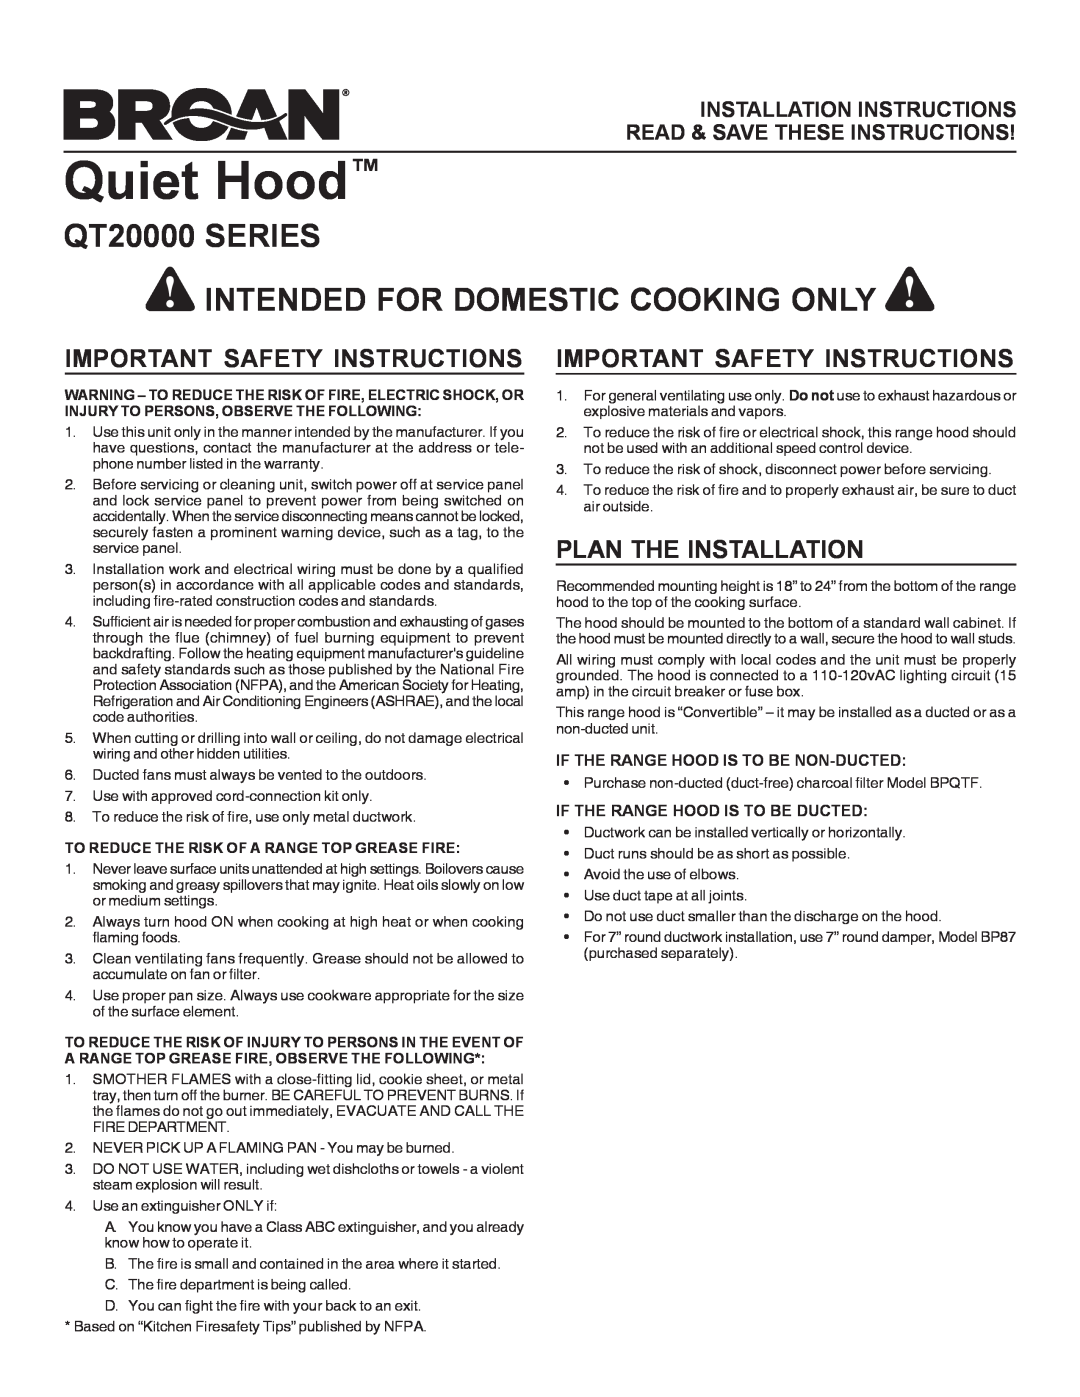 Broan QT230SS installation instructions Quiet Hood, QT20000 SERIES INTENDED FOR DOMESTIC COOKING ONLY 